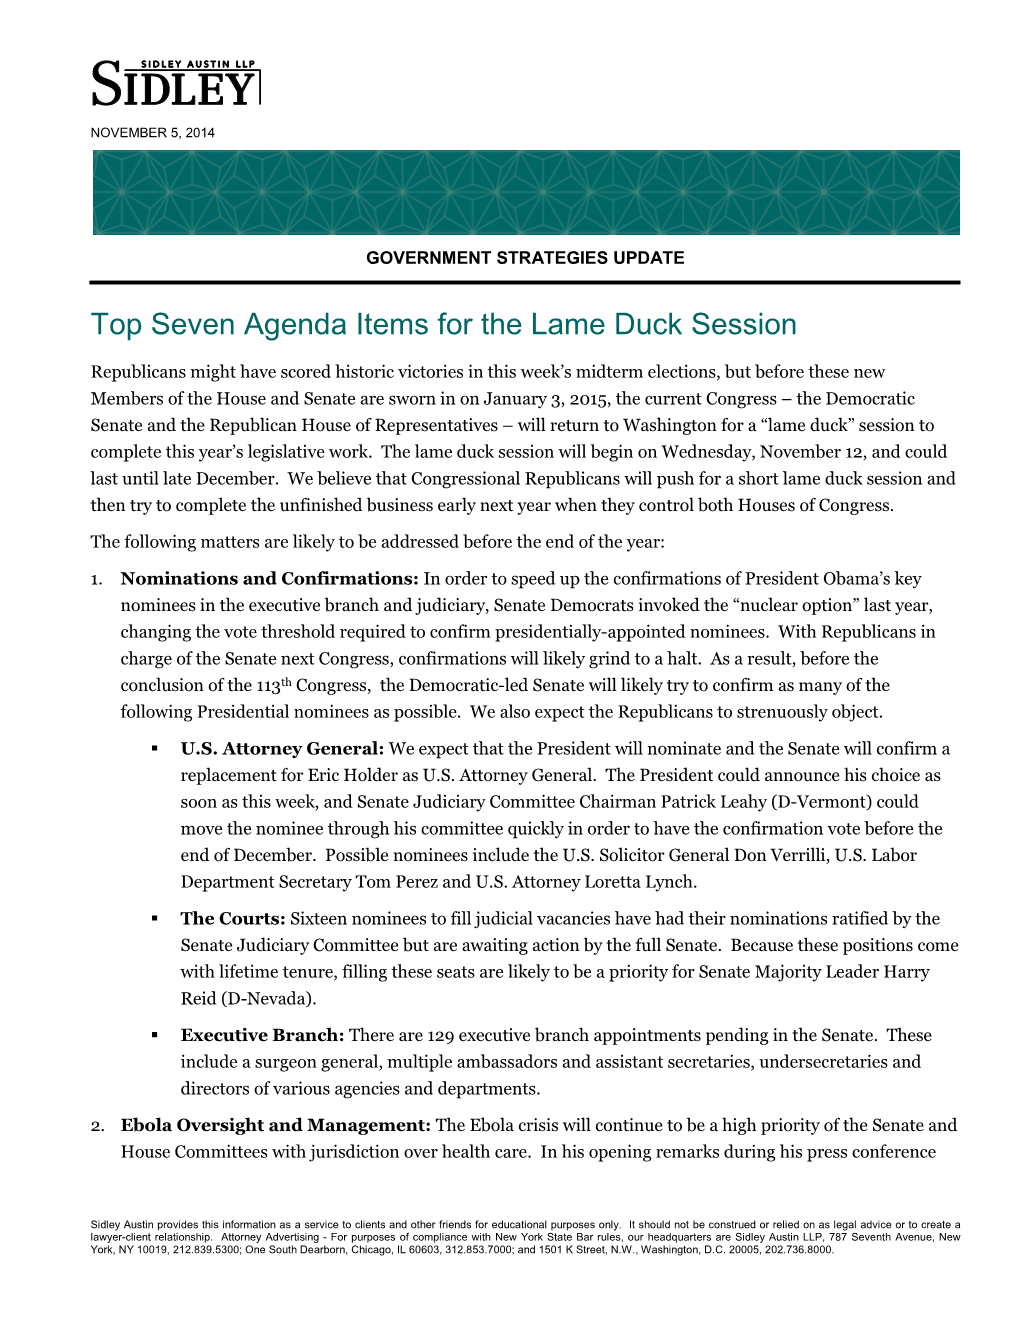 Top Seven Agenda Items for the Lame Duck Session